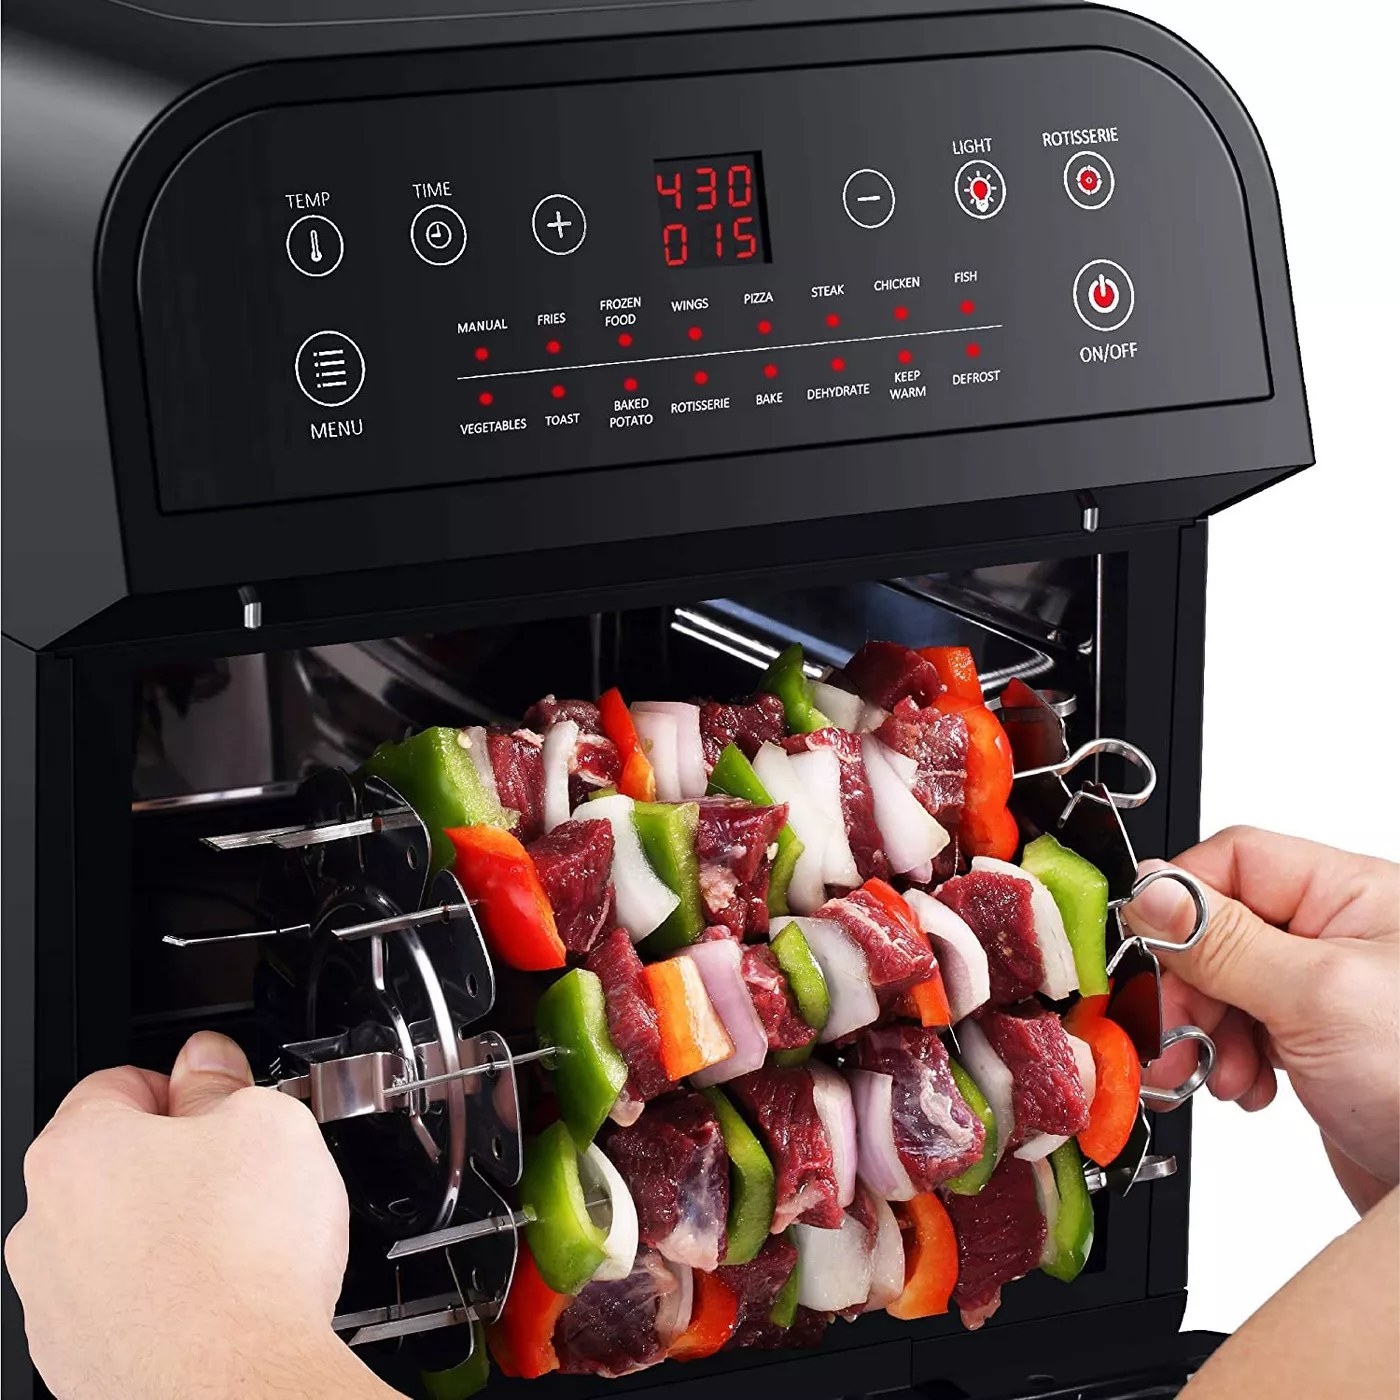 The small oven with the skewer rotisserie insert